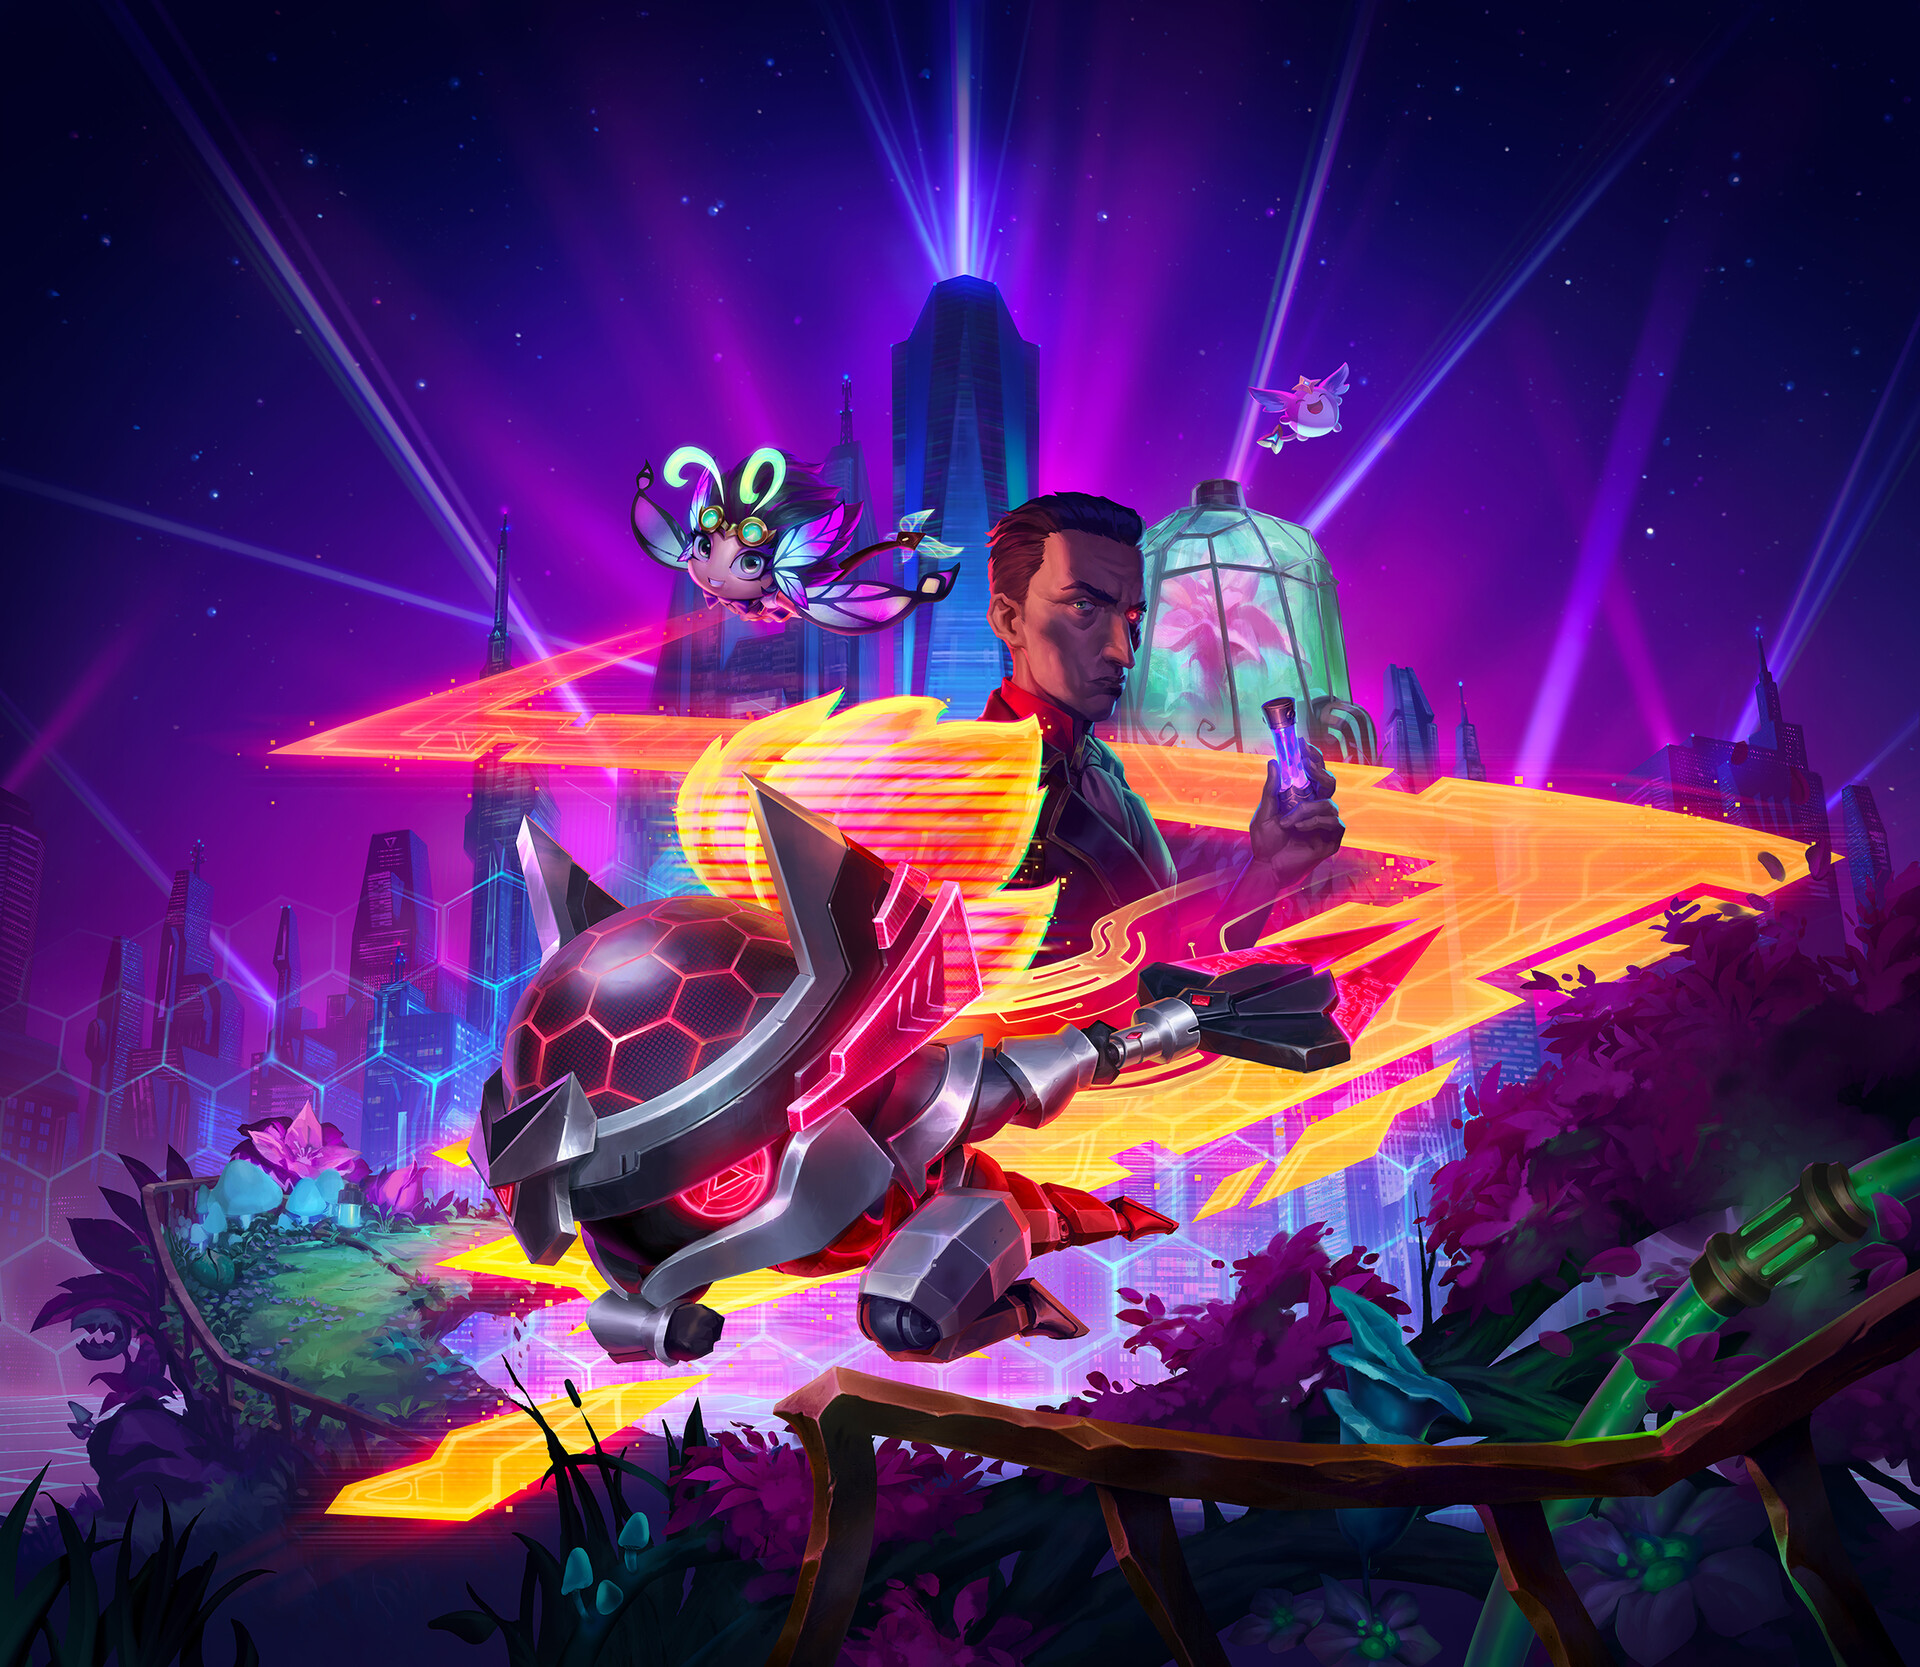 Here's how to get the free TFT Little Legends eggs on Twitch Prime - Inven  Global